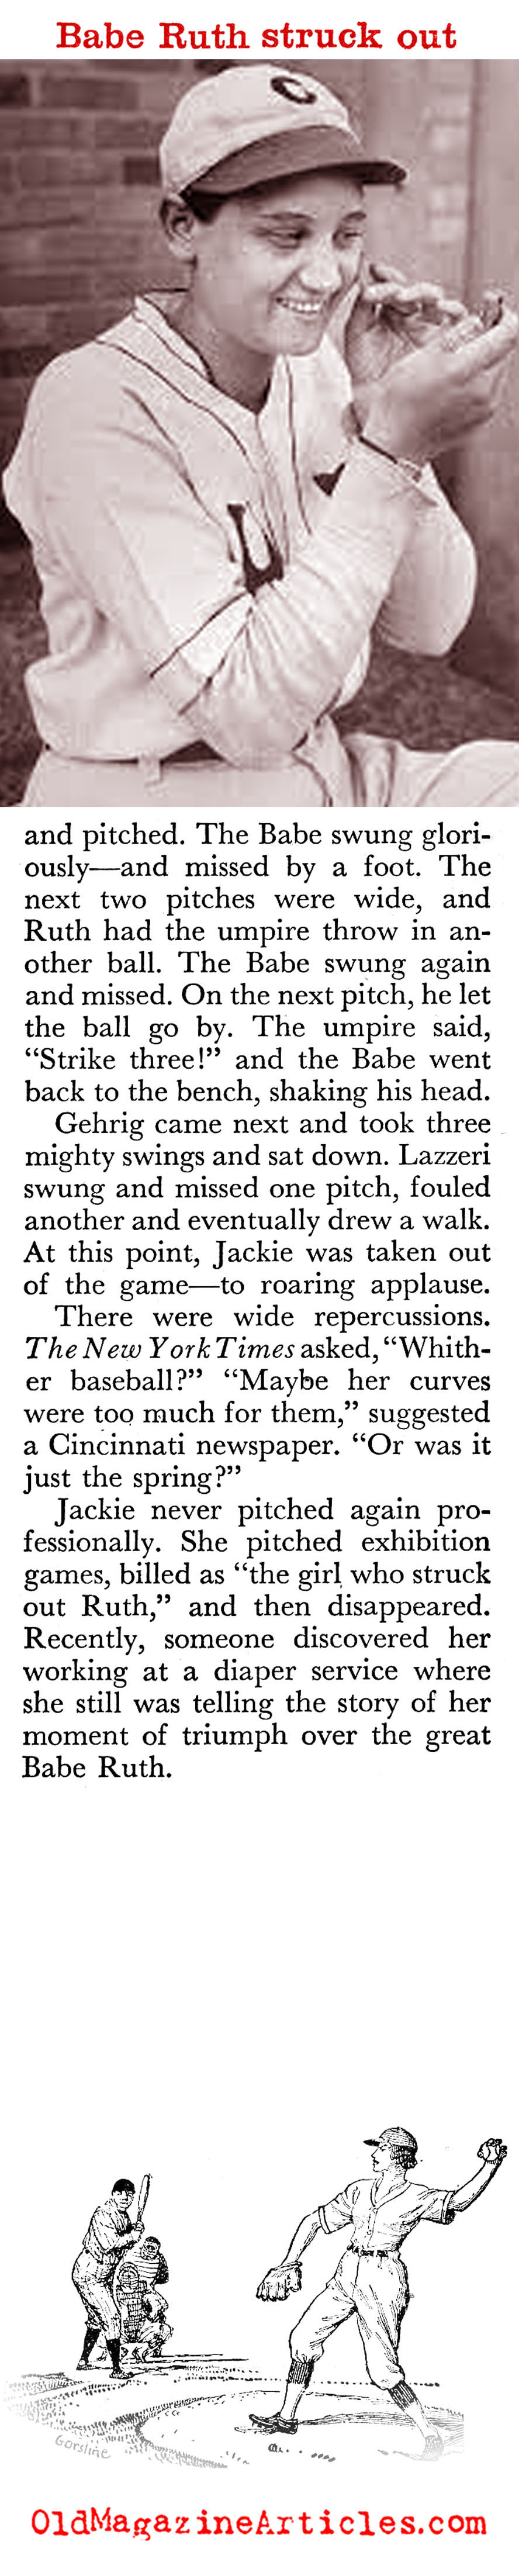 'The Girl Who Struck-Out The Babe (Coronet Magazine, 1959)